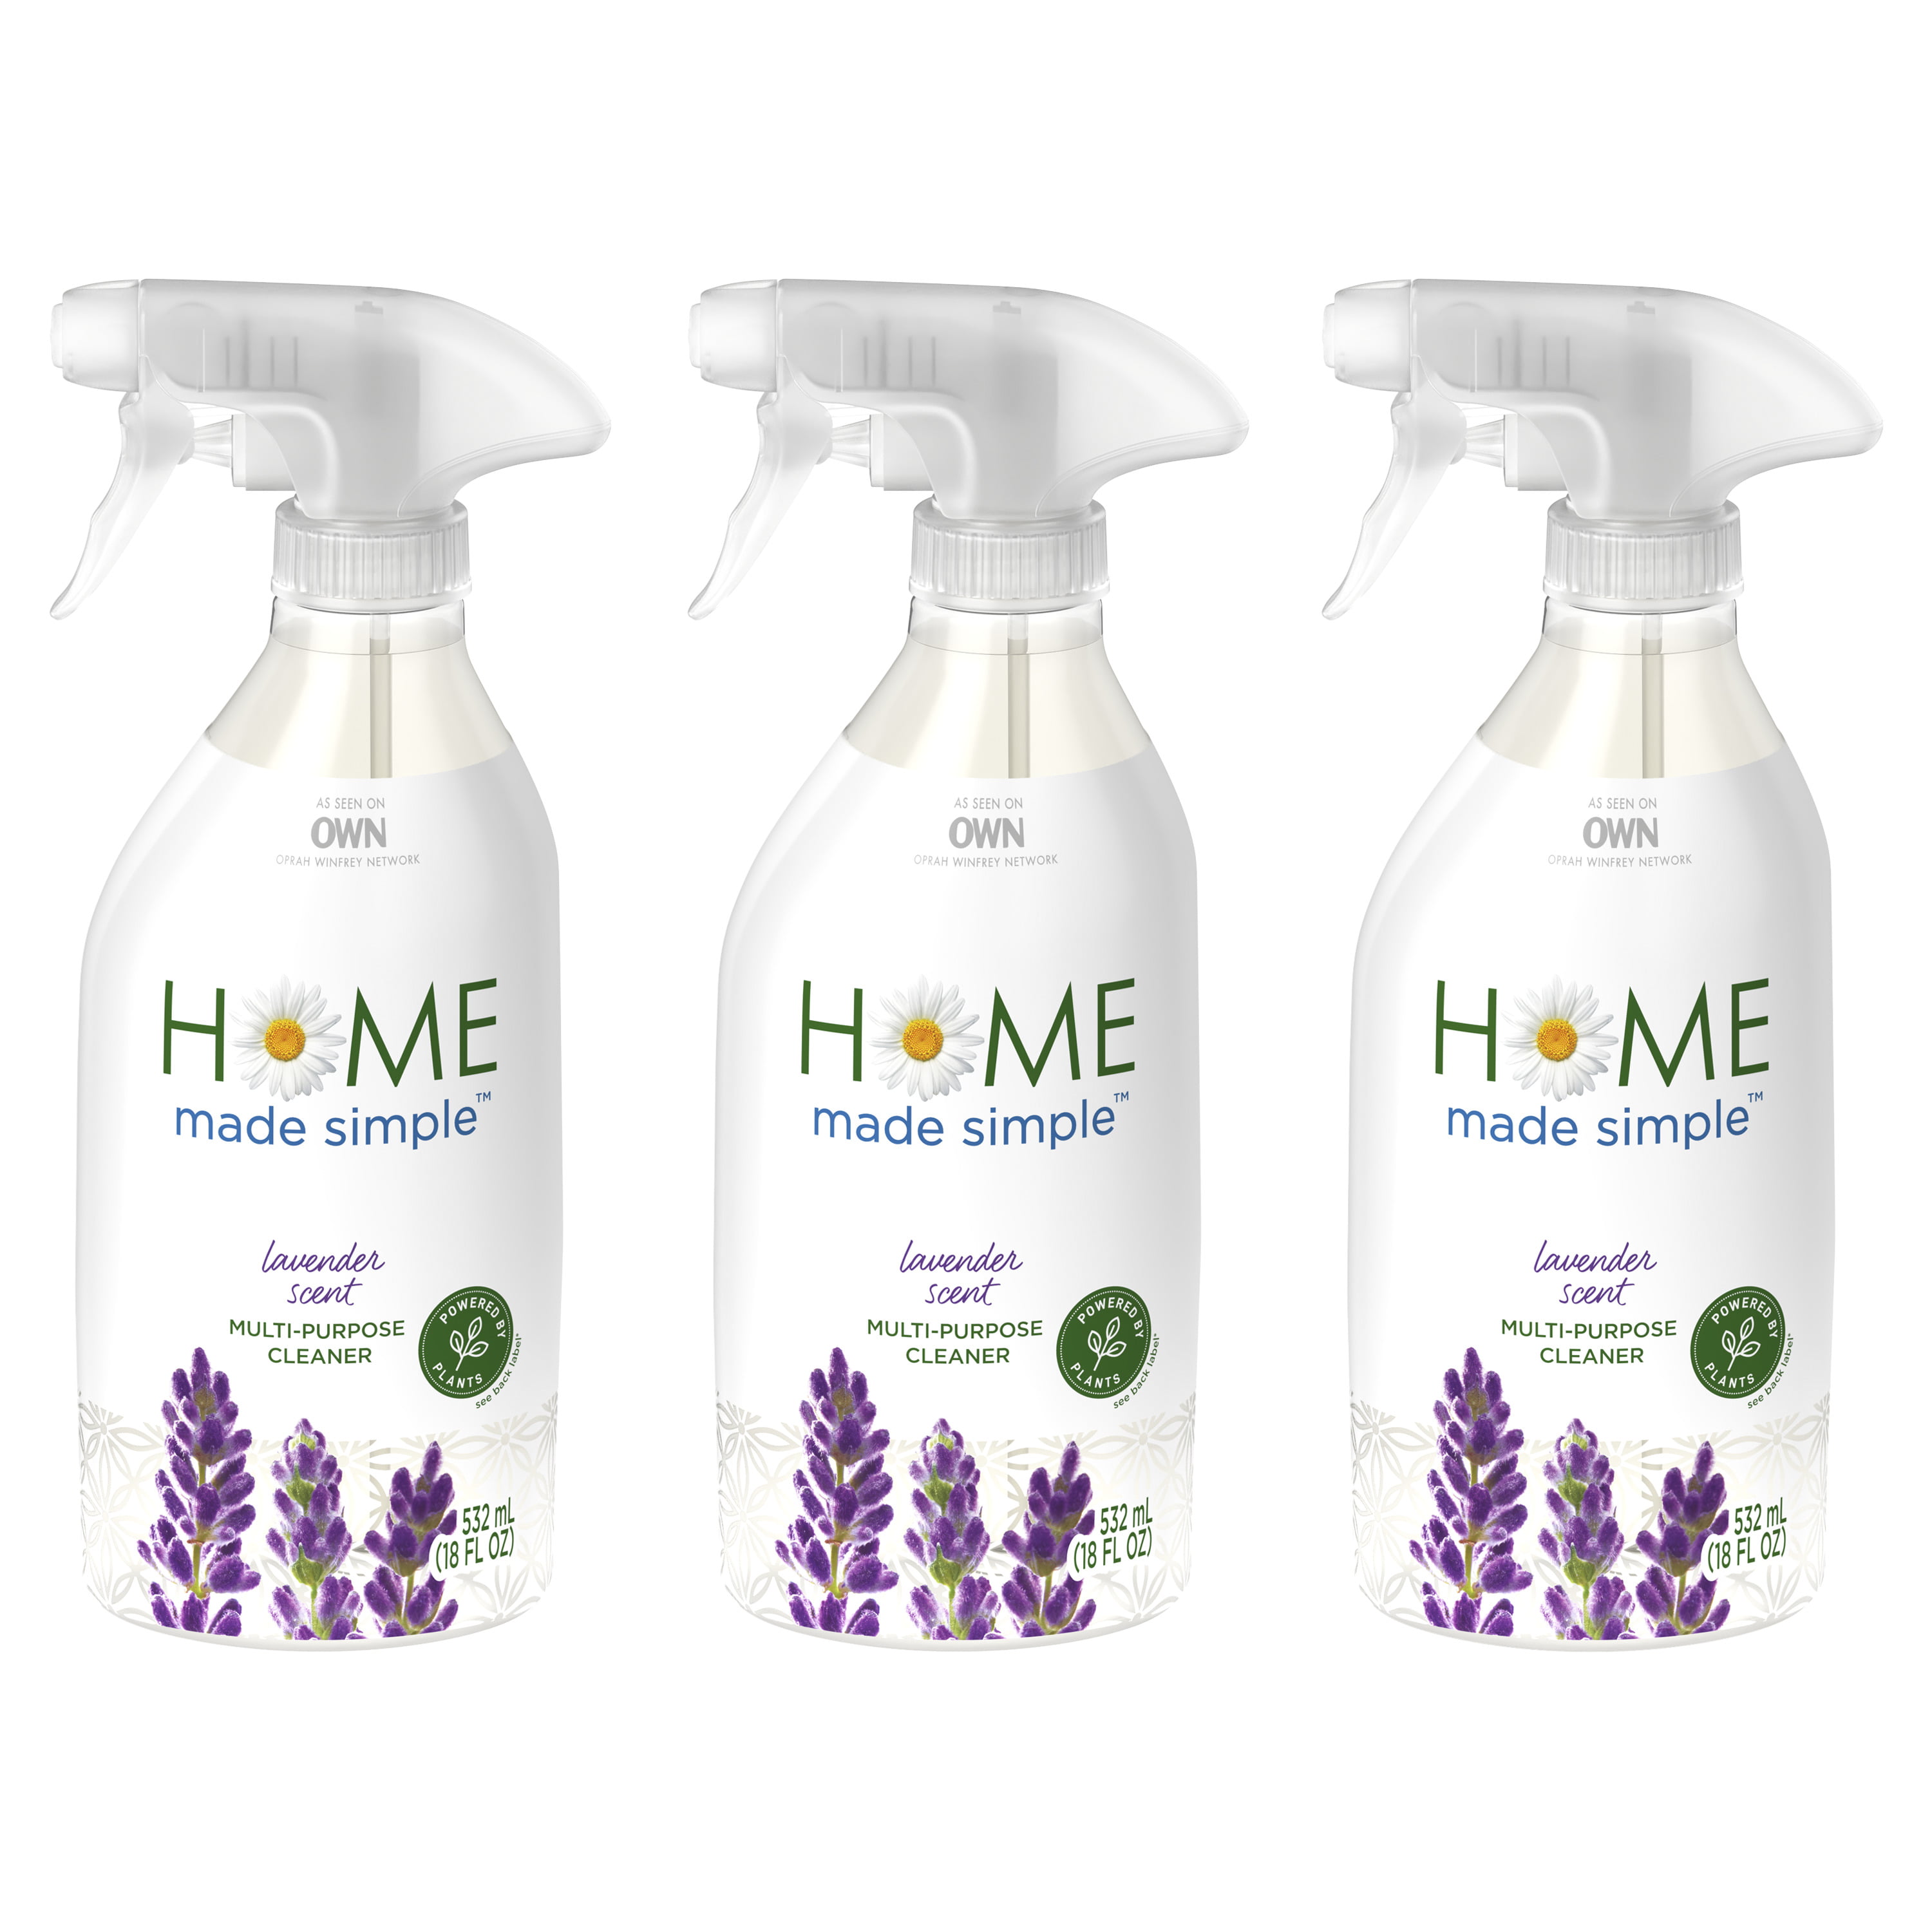 Simply make it. Лайна спрей с лавандой. Clean made Турция. Papilion Multi surface Cleaner Lavender. Natural household period.